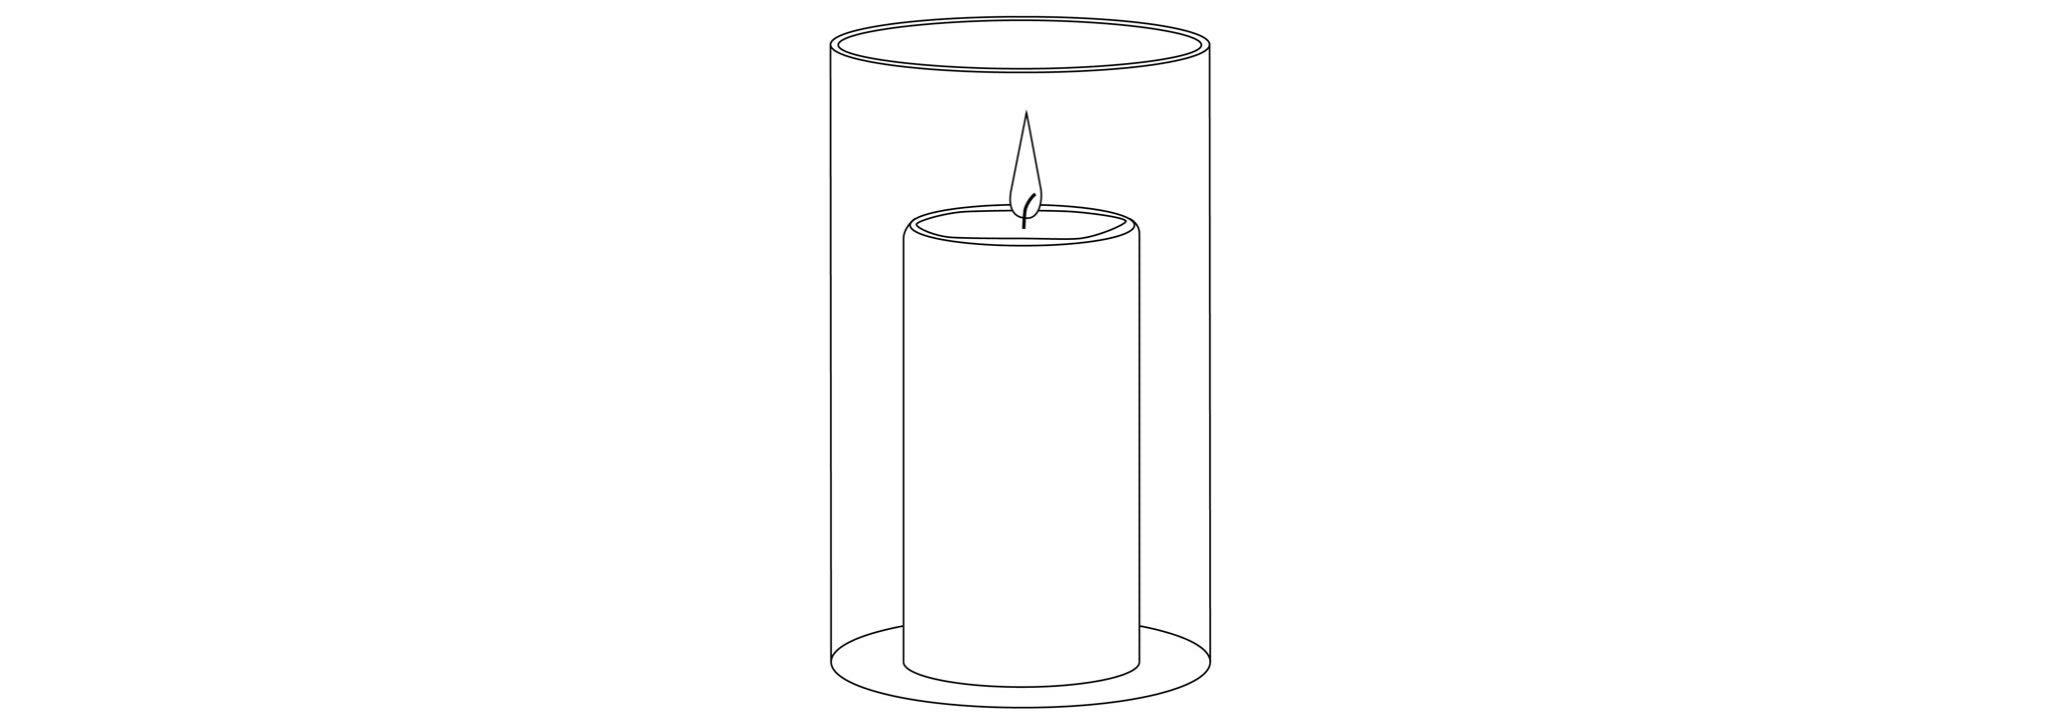 Candle in container